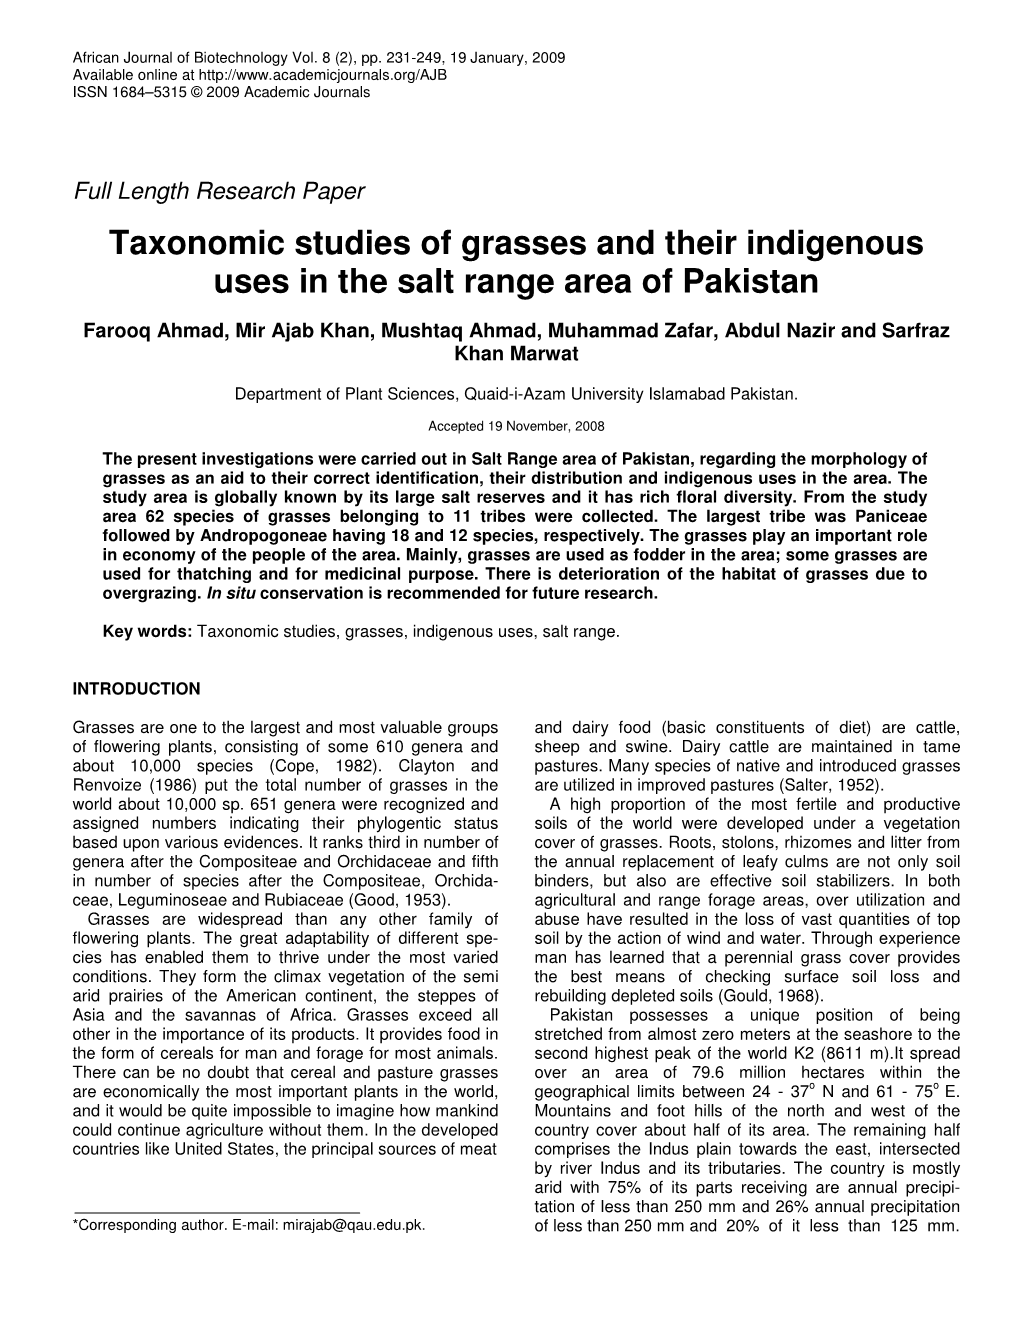 Taxonomic Studies of Grasses and Their Indigenous Uses in the Salt Range Area of Pakistan